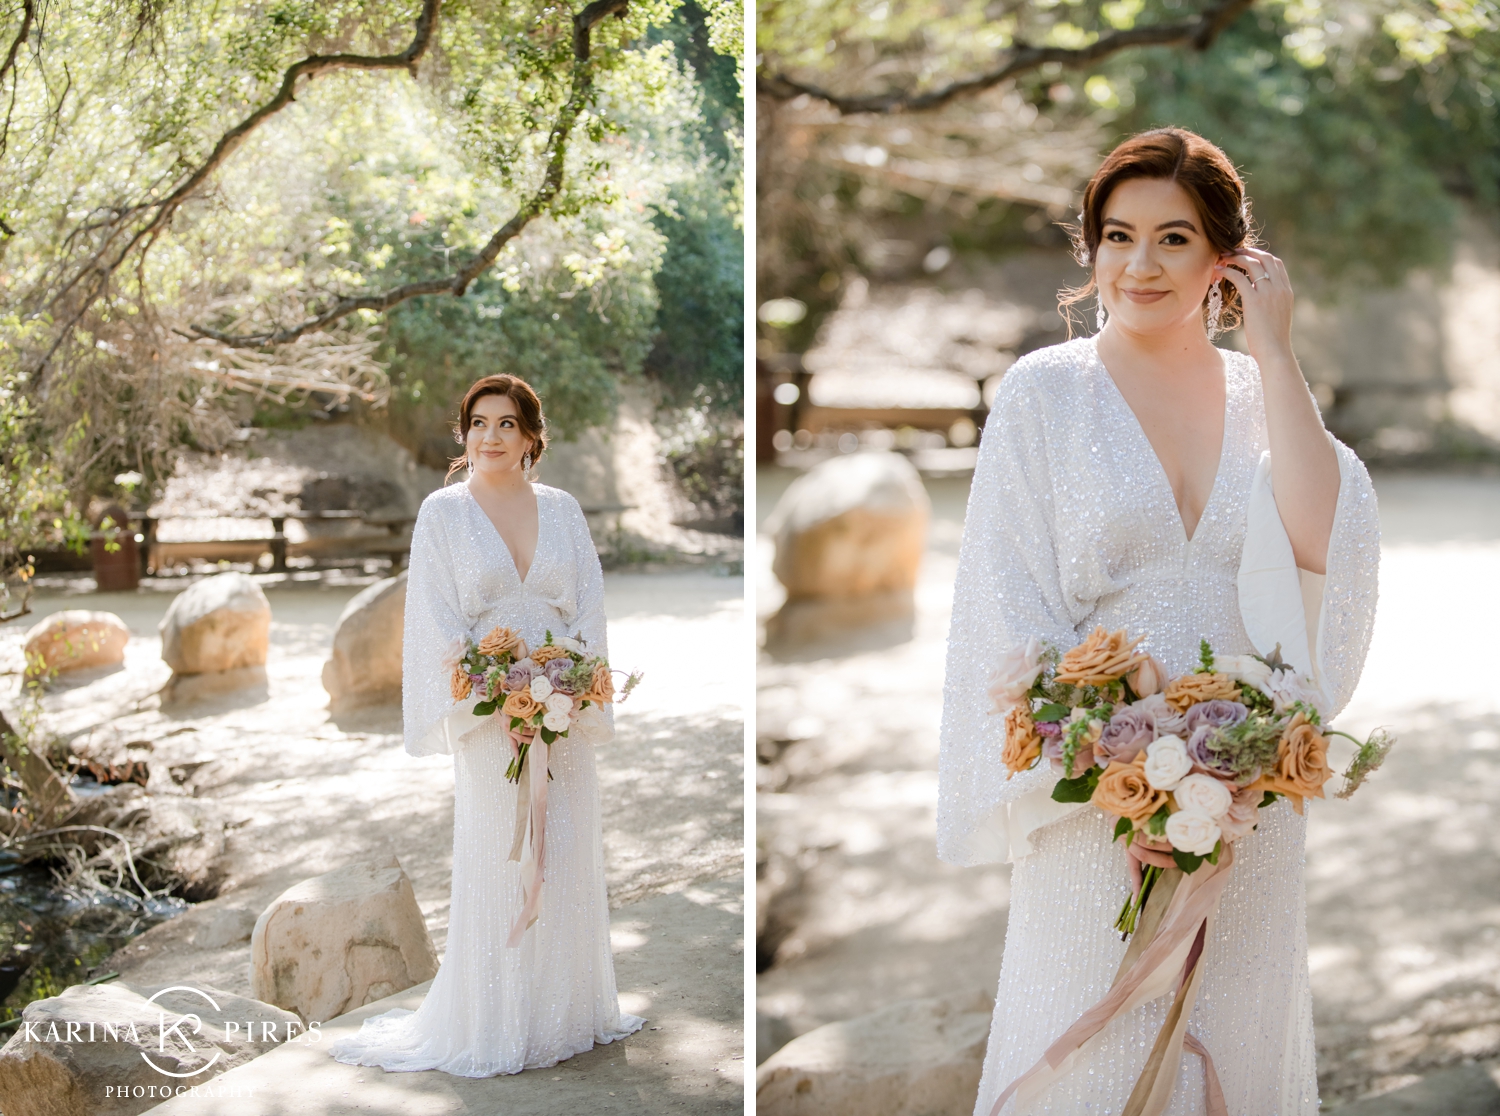 A Surprise Forest Elopement for Essential Workers in Los Angeles - Featured on Inside Weddings